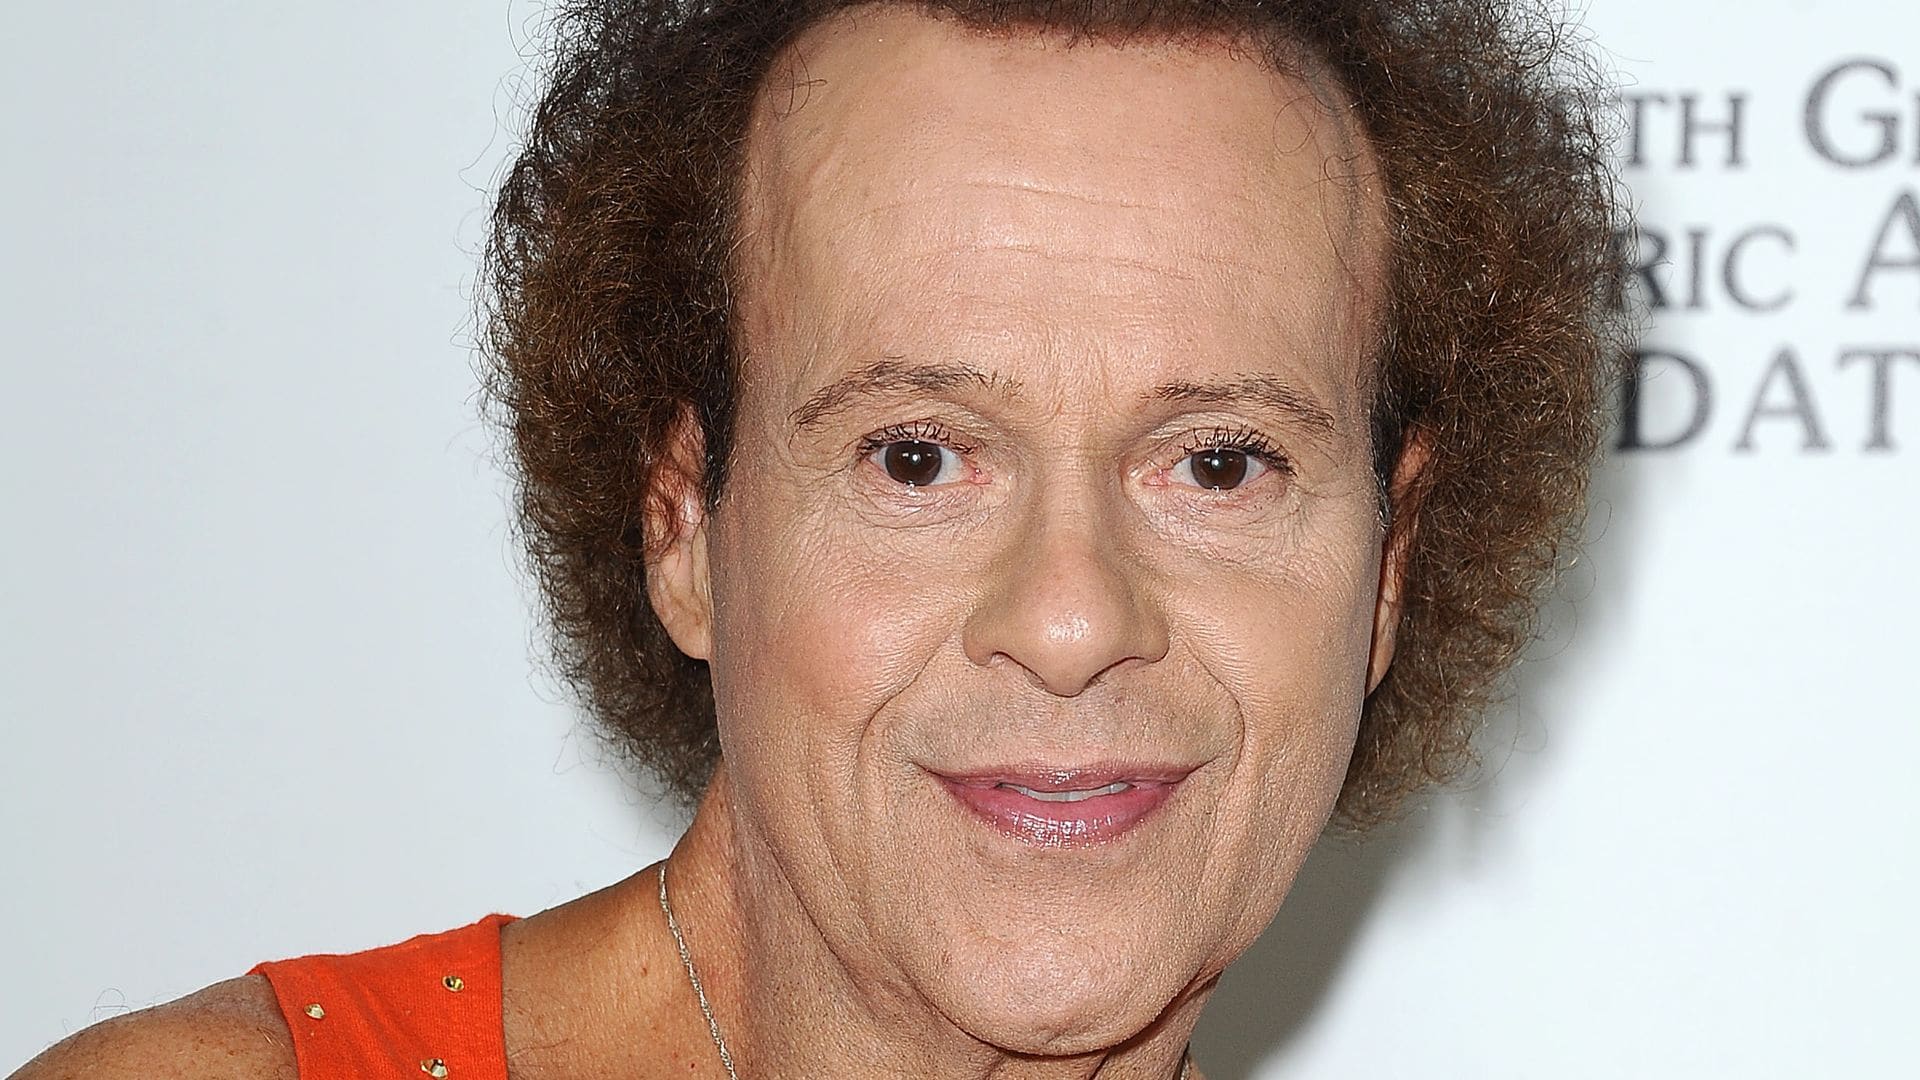 Richard Simmons reportedly fell the night before his passing